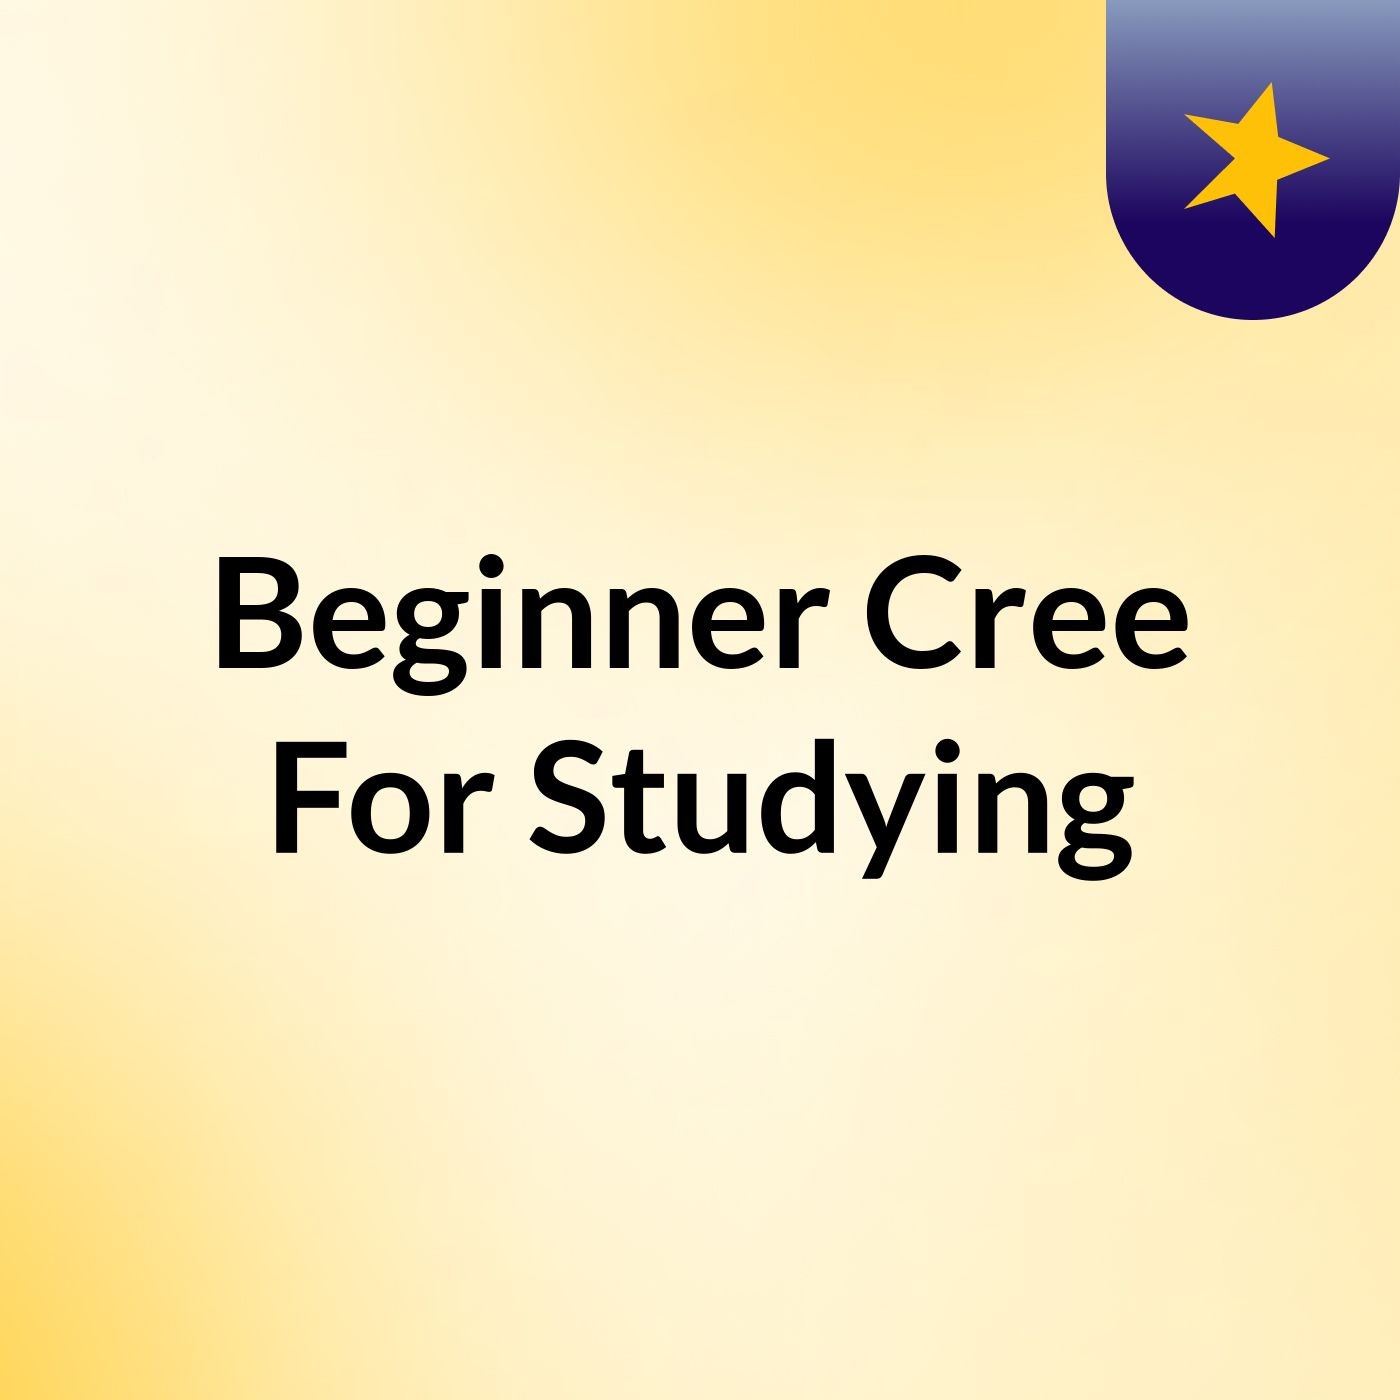 Beginner Cree For Studying